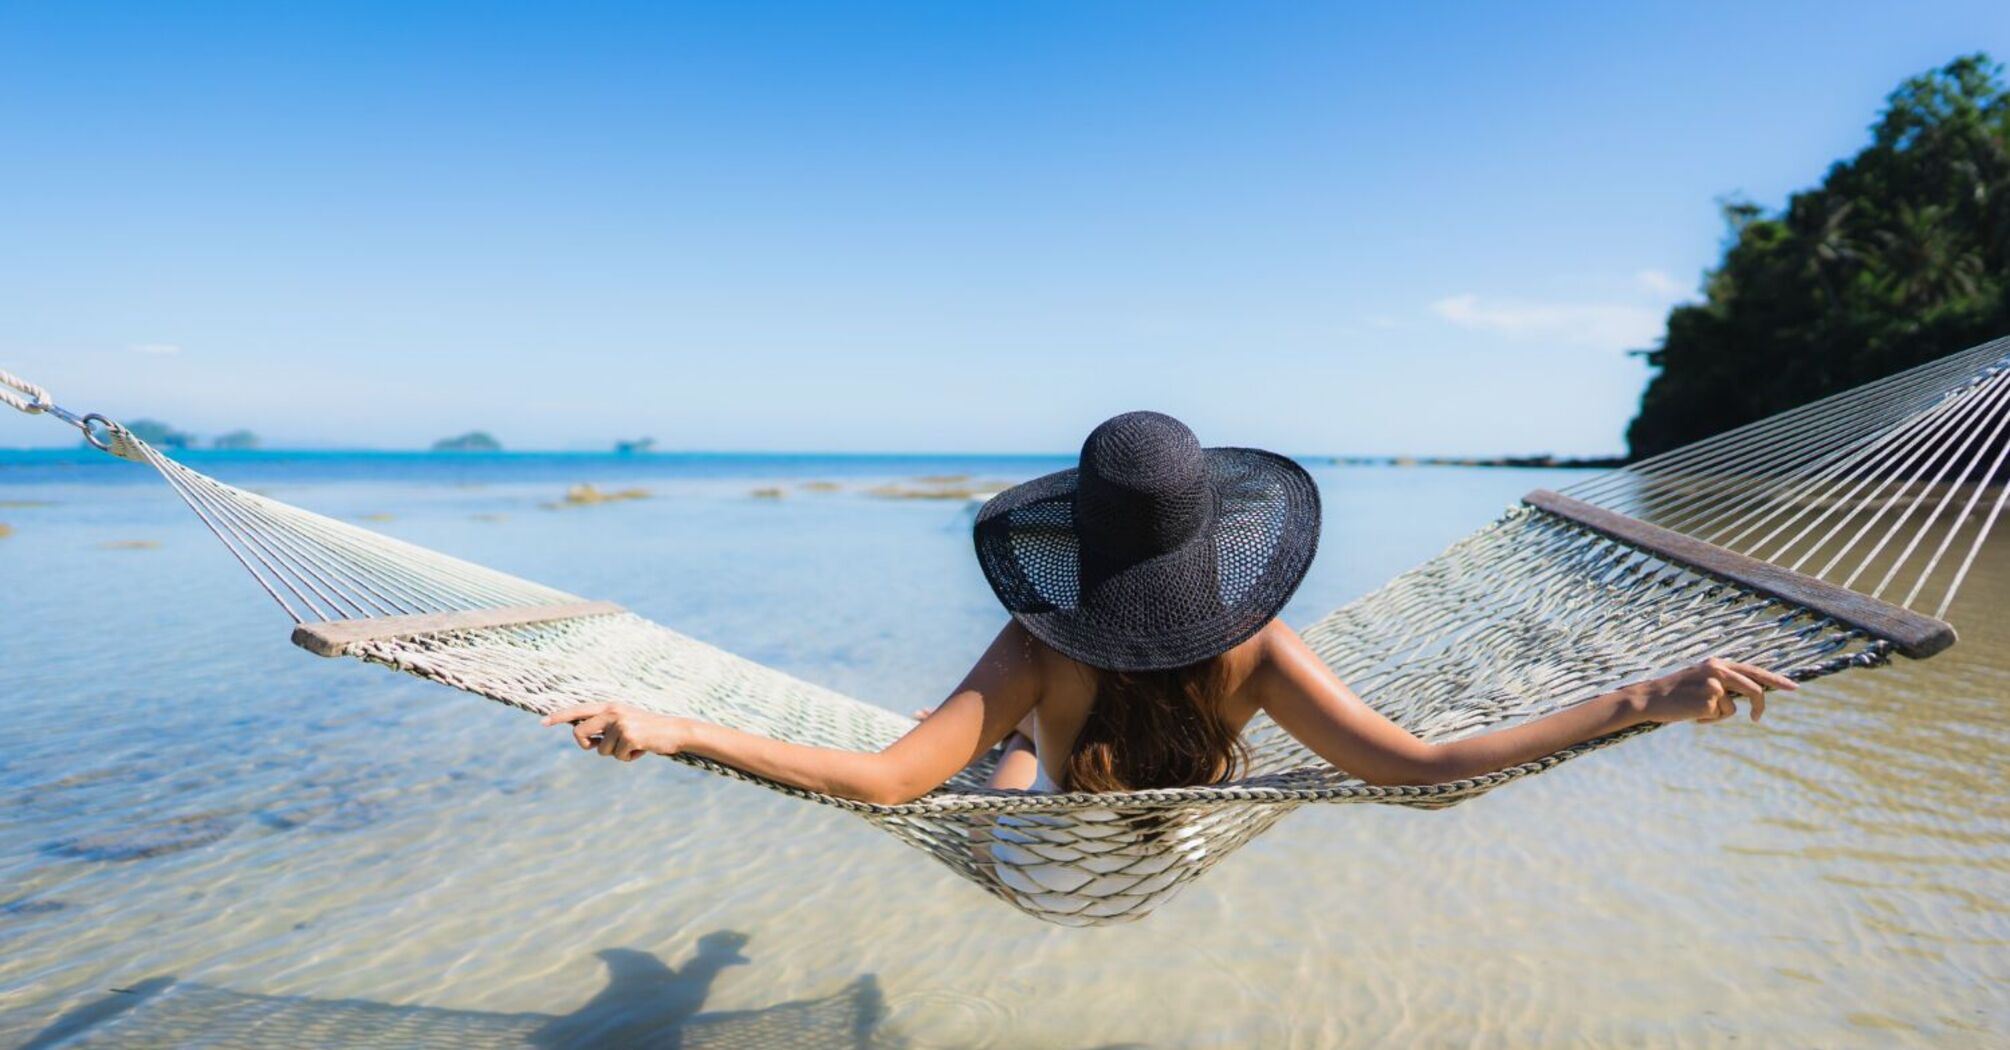 It's hard to relax on vacation: how much do we really relax?